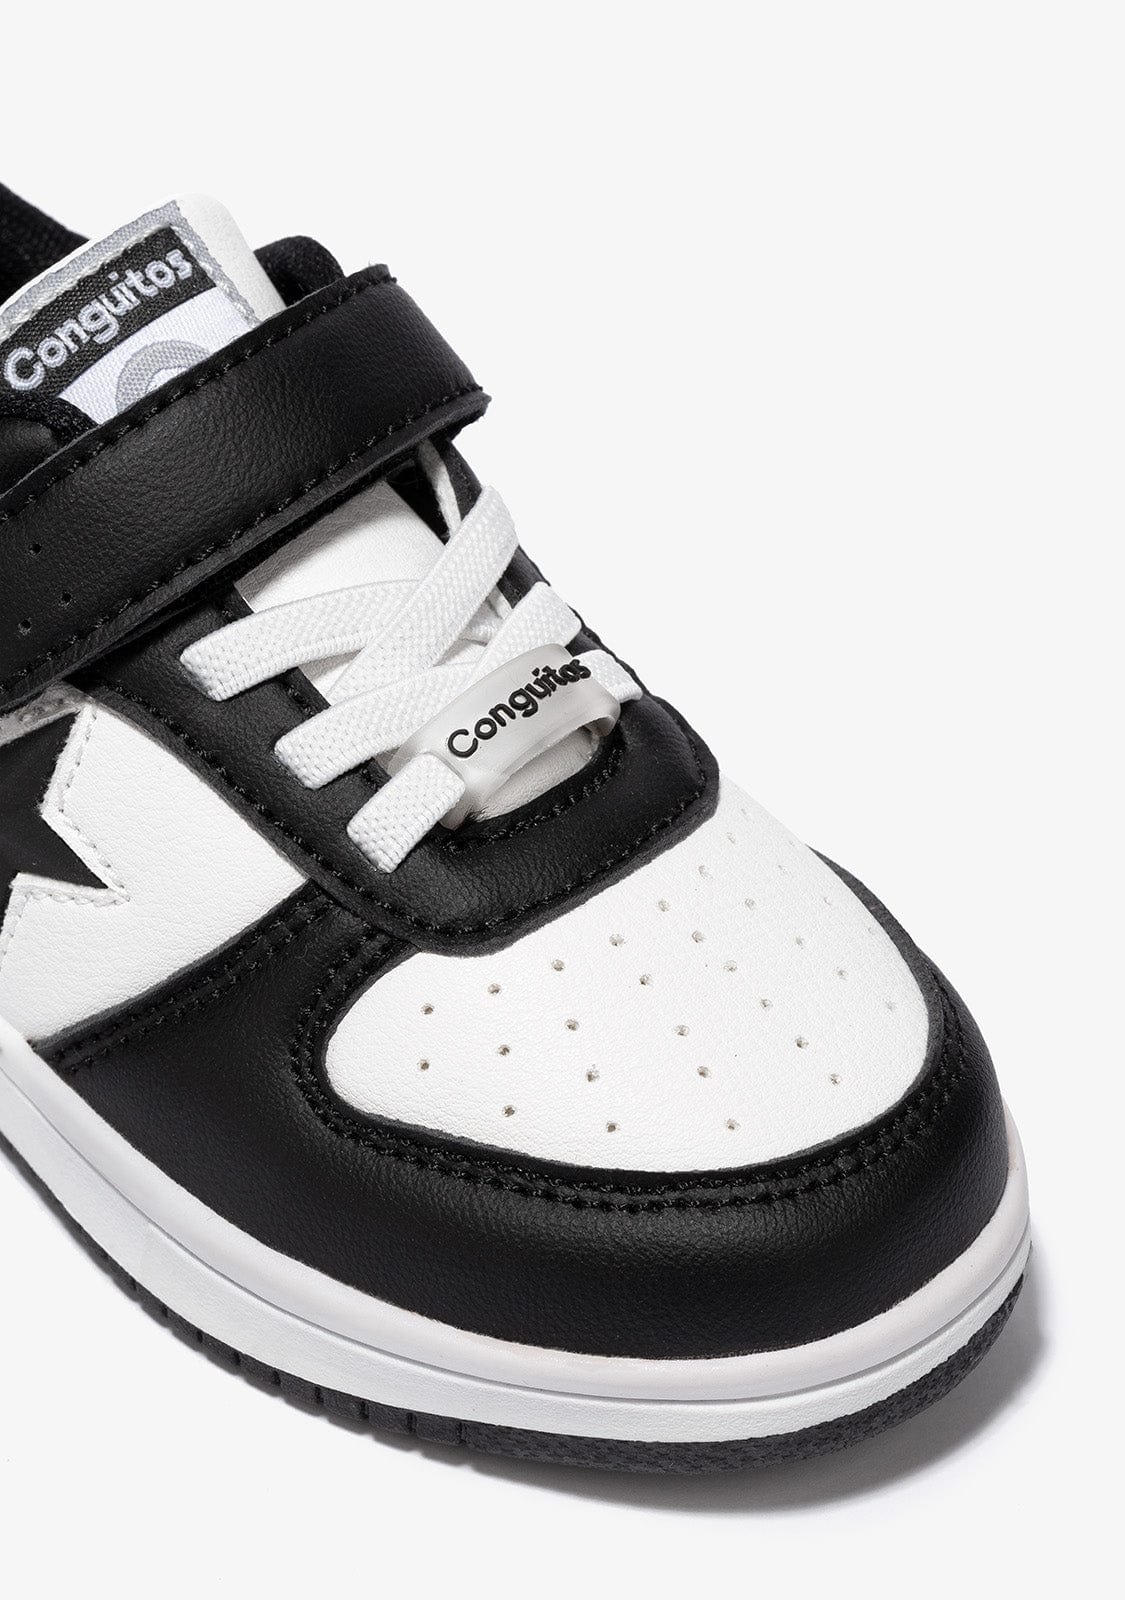 CONGUITOS Shoes Unisex Black - White Star With Lights Sneakers